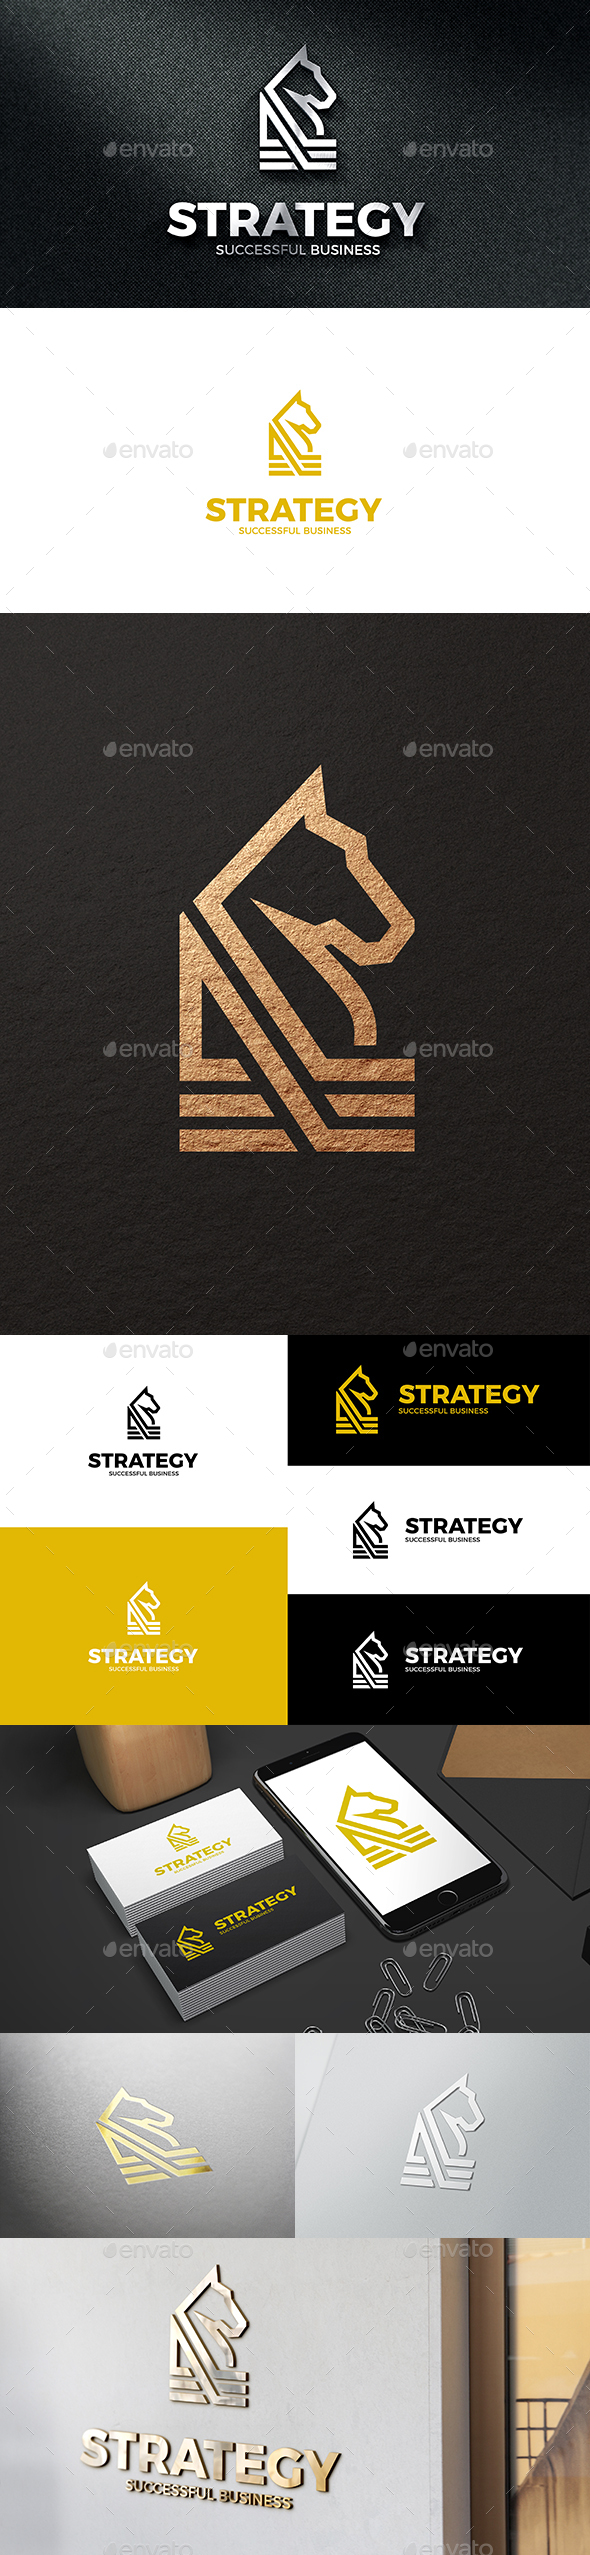 Strategy - Abstract Horse Clean Business Logo